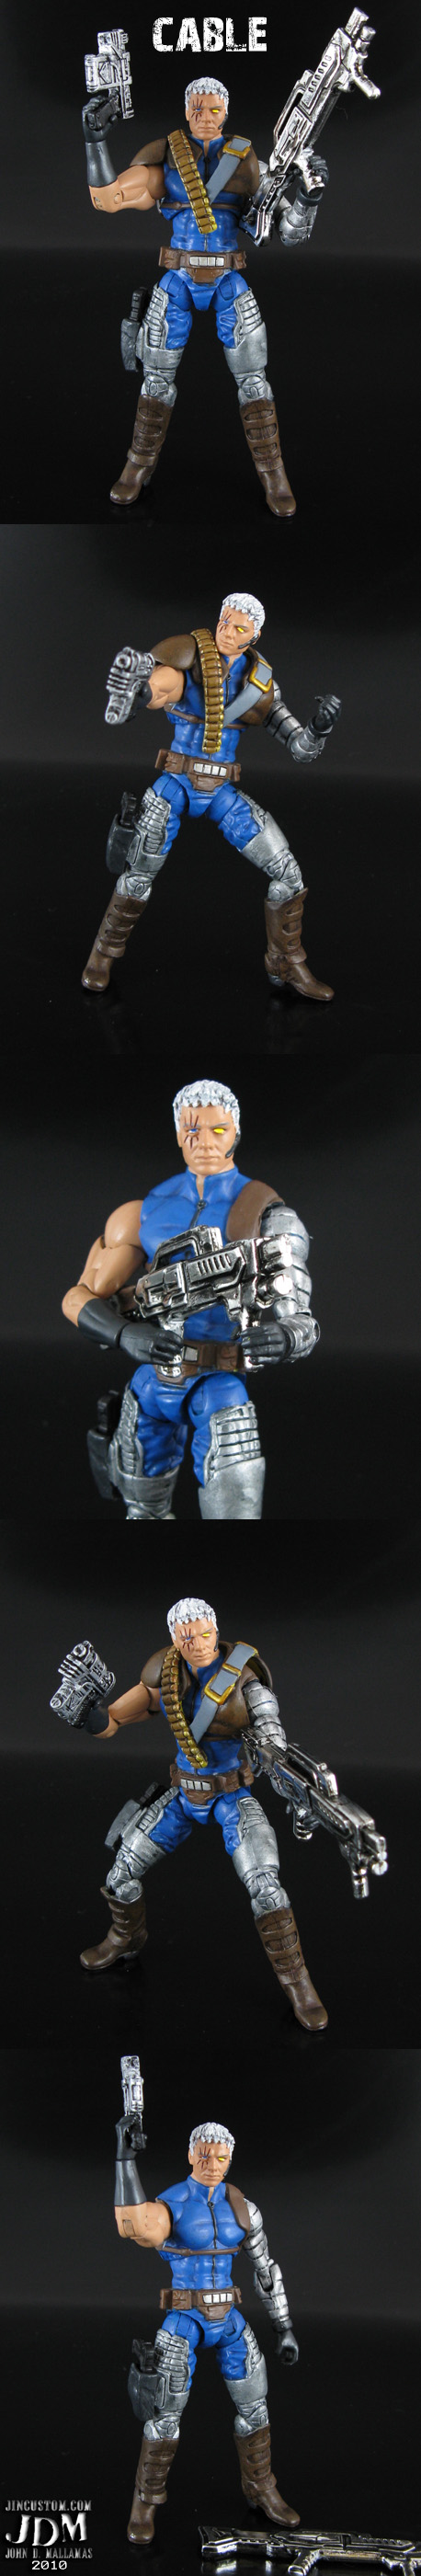 Marvel Universe Cable Custom